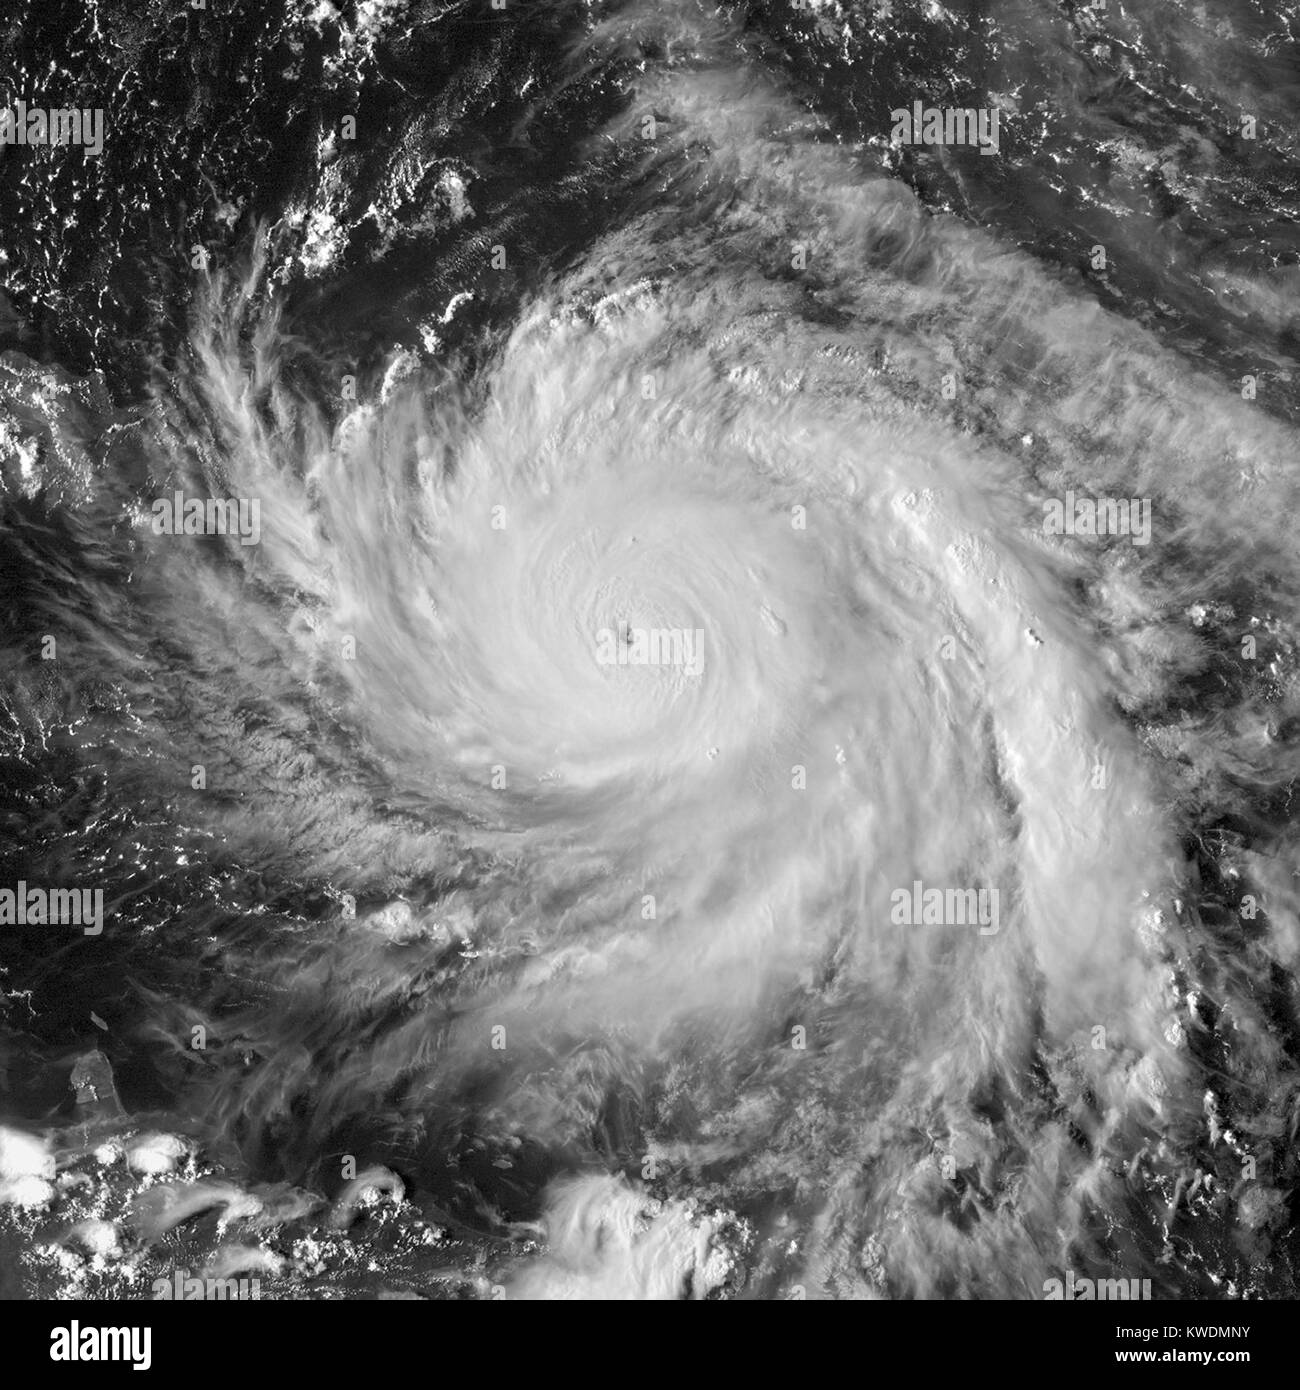 Satellite image of Hurricane Maria near peak intensity northwest of Dominica on Sept. 19, 2017. She caused the worst natural disaster on record in Dominica. On Sept. 20, Maria hit Puerto Rico, causing catastrophic damage and an ongoing humanitarian crisis (BSLOC 2017 18 174) Stock Photo